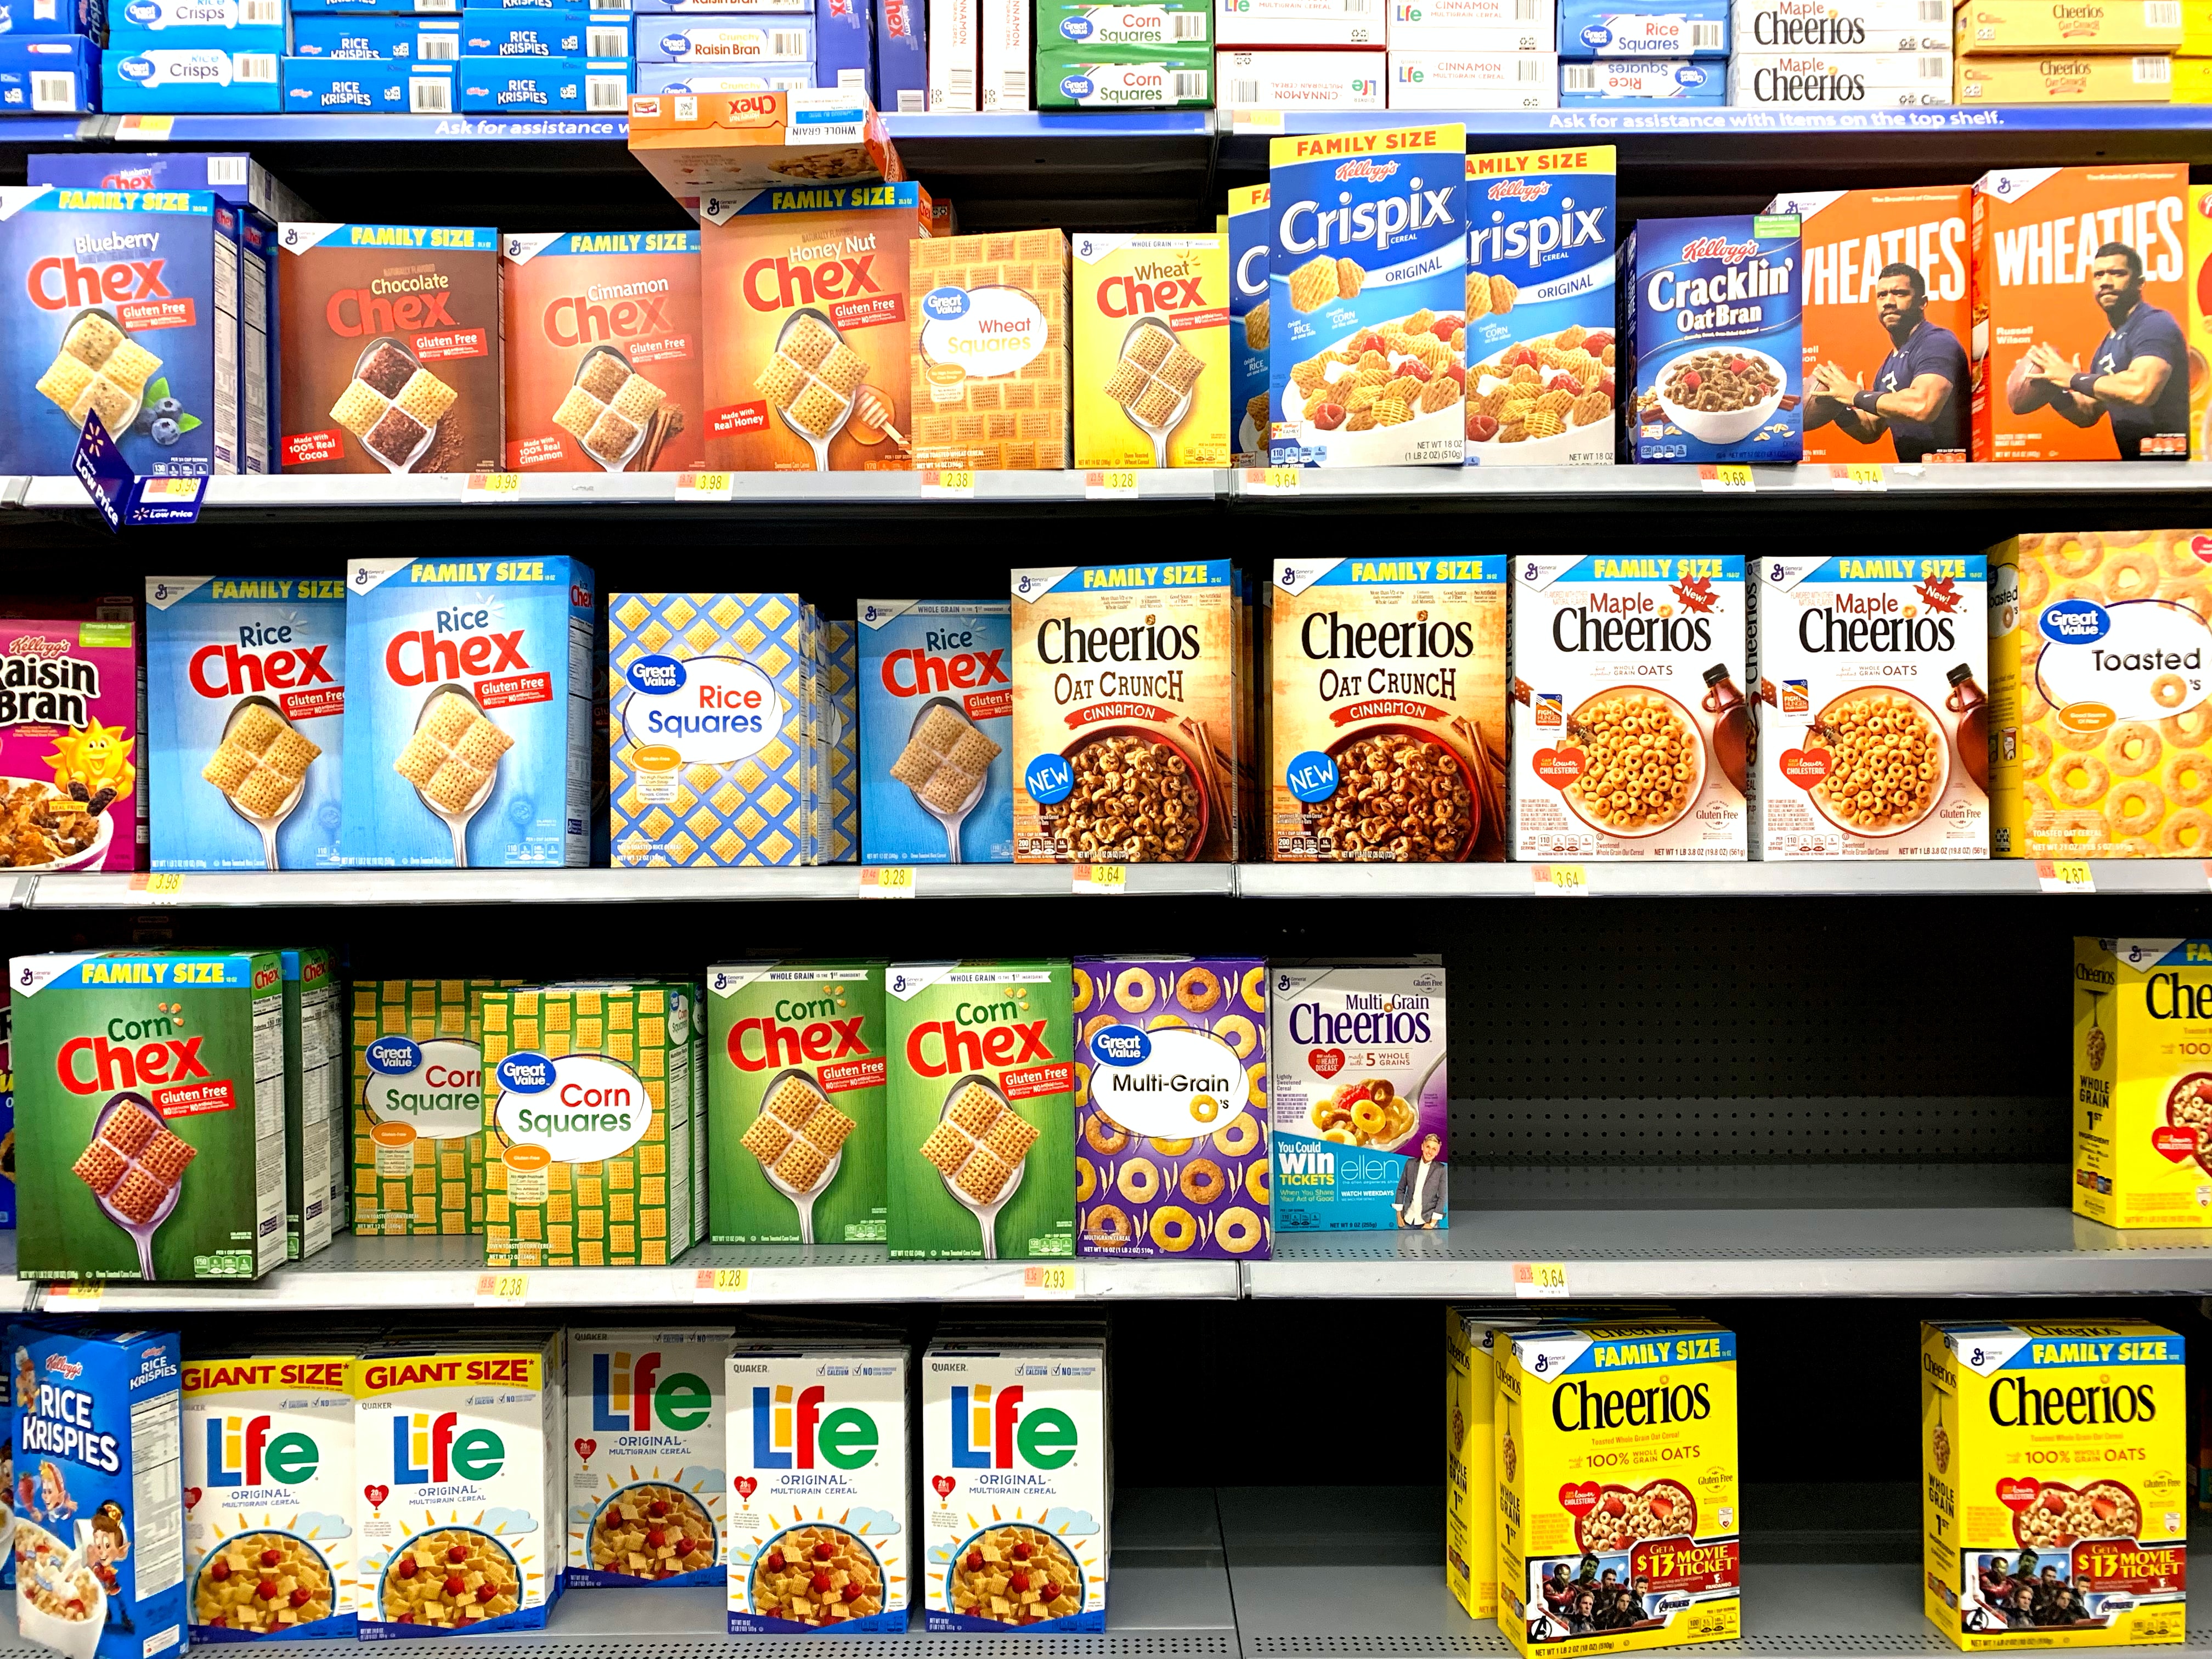 CPG brands continue to see healthy sales during the COVID-19 crisis.